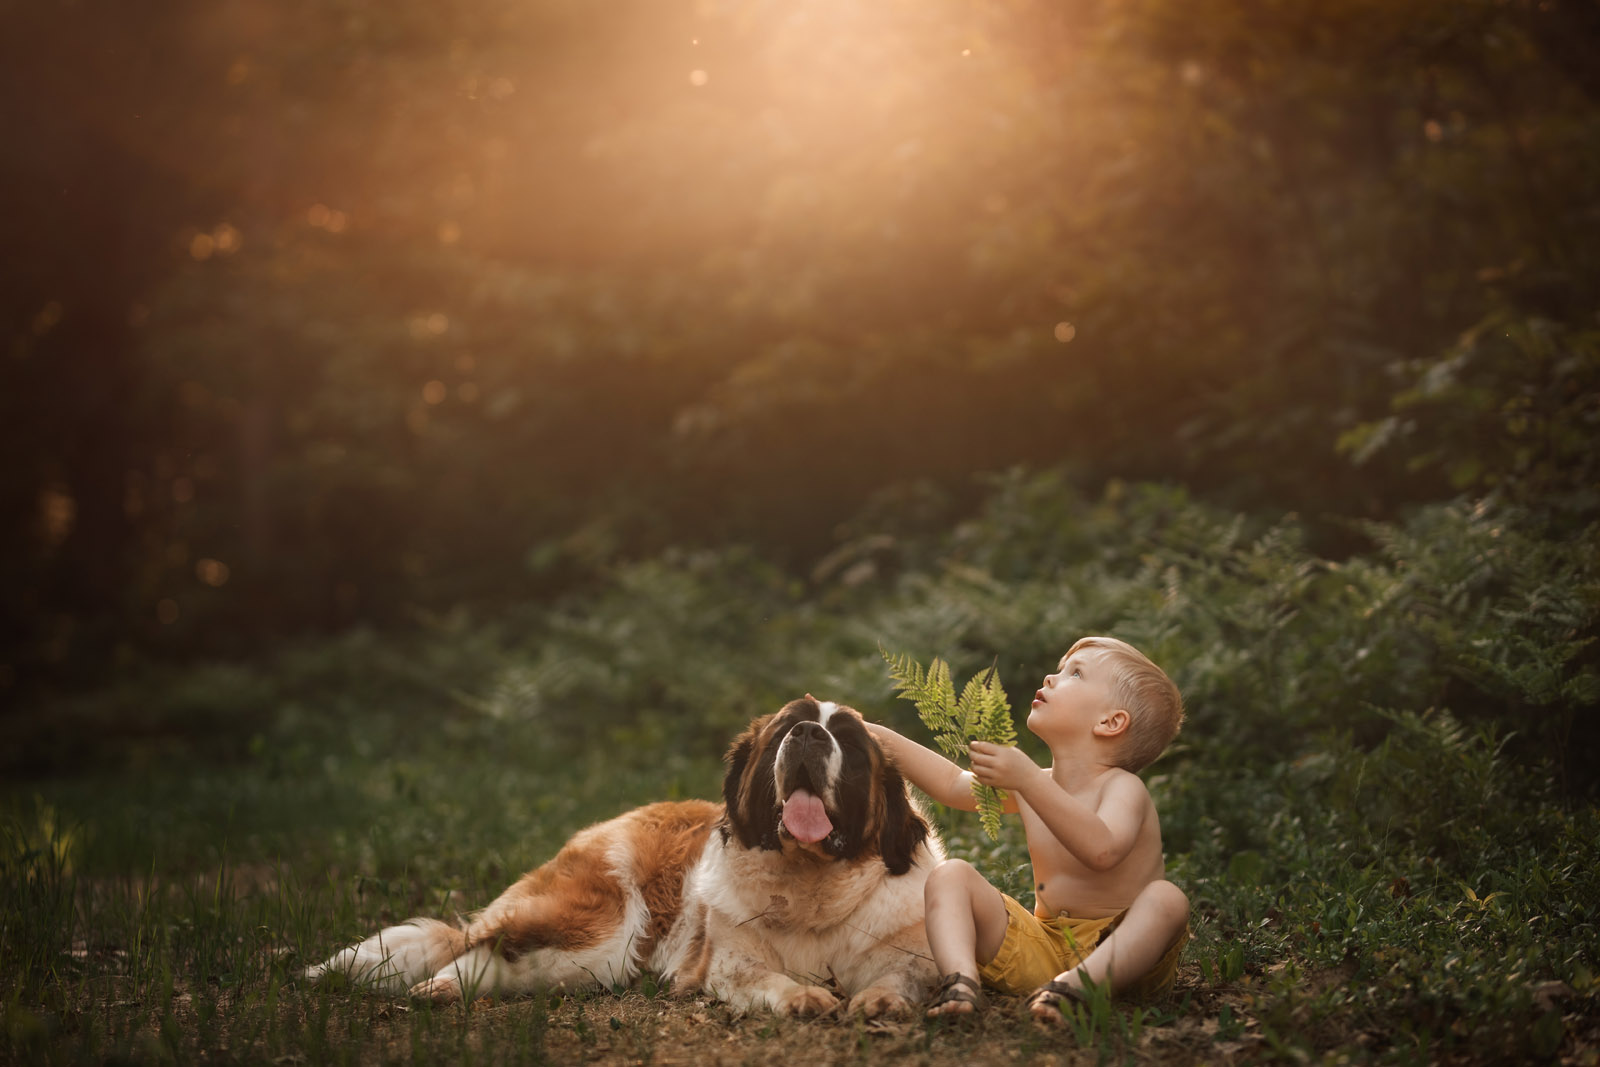 photographing pets large dog and small boy in warm light st bernard by meg loeks